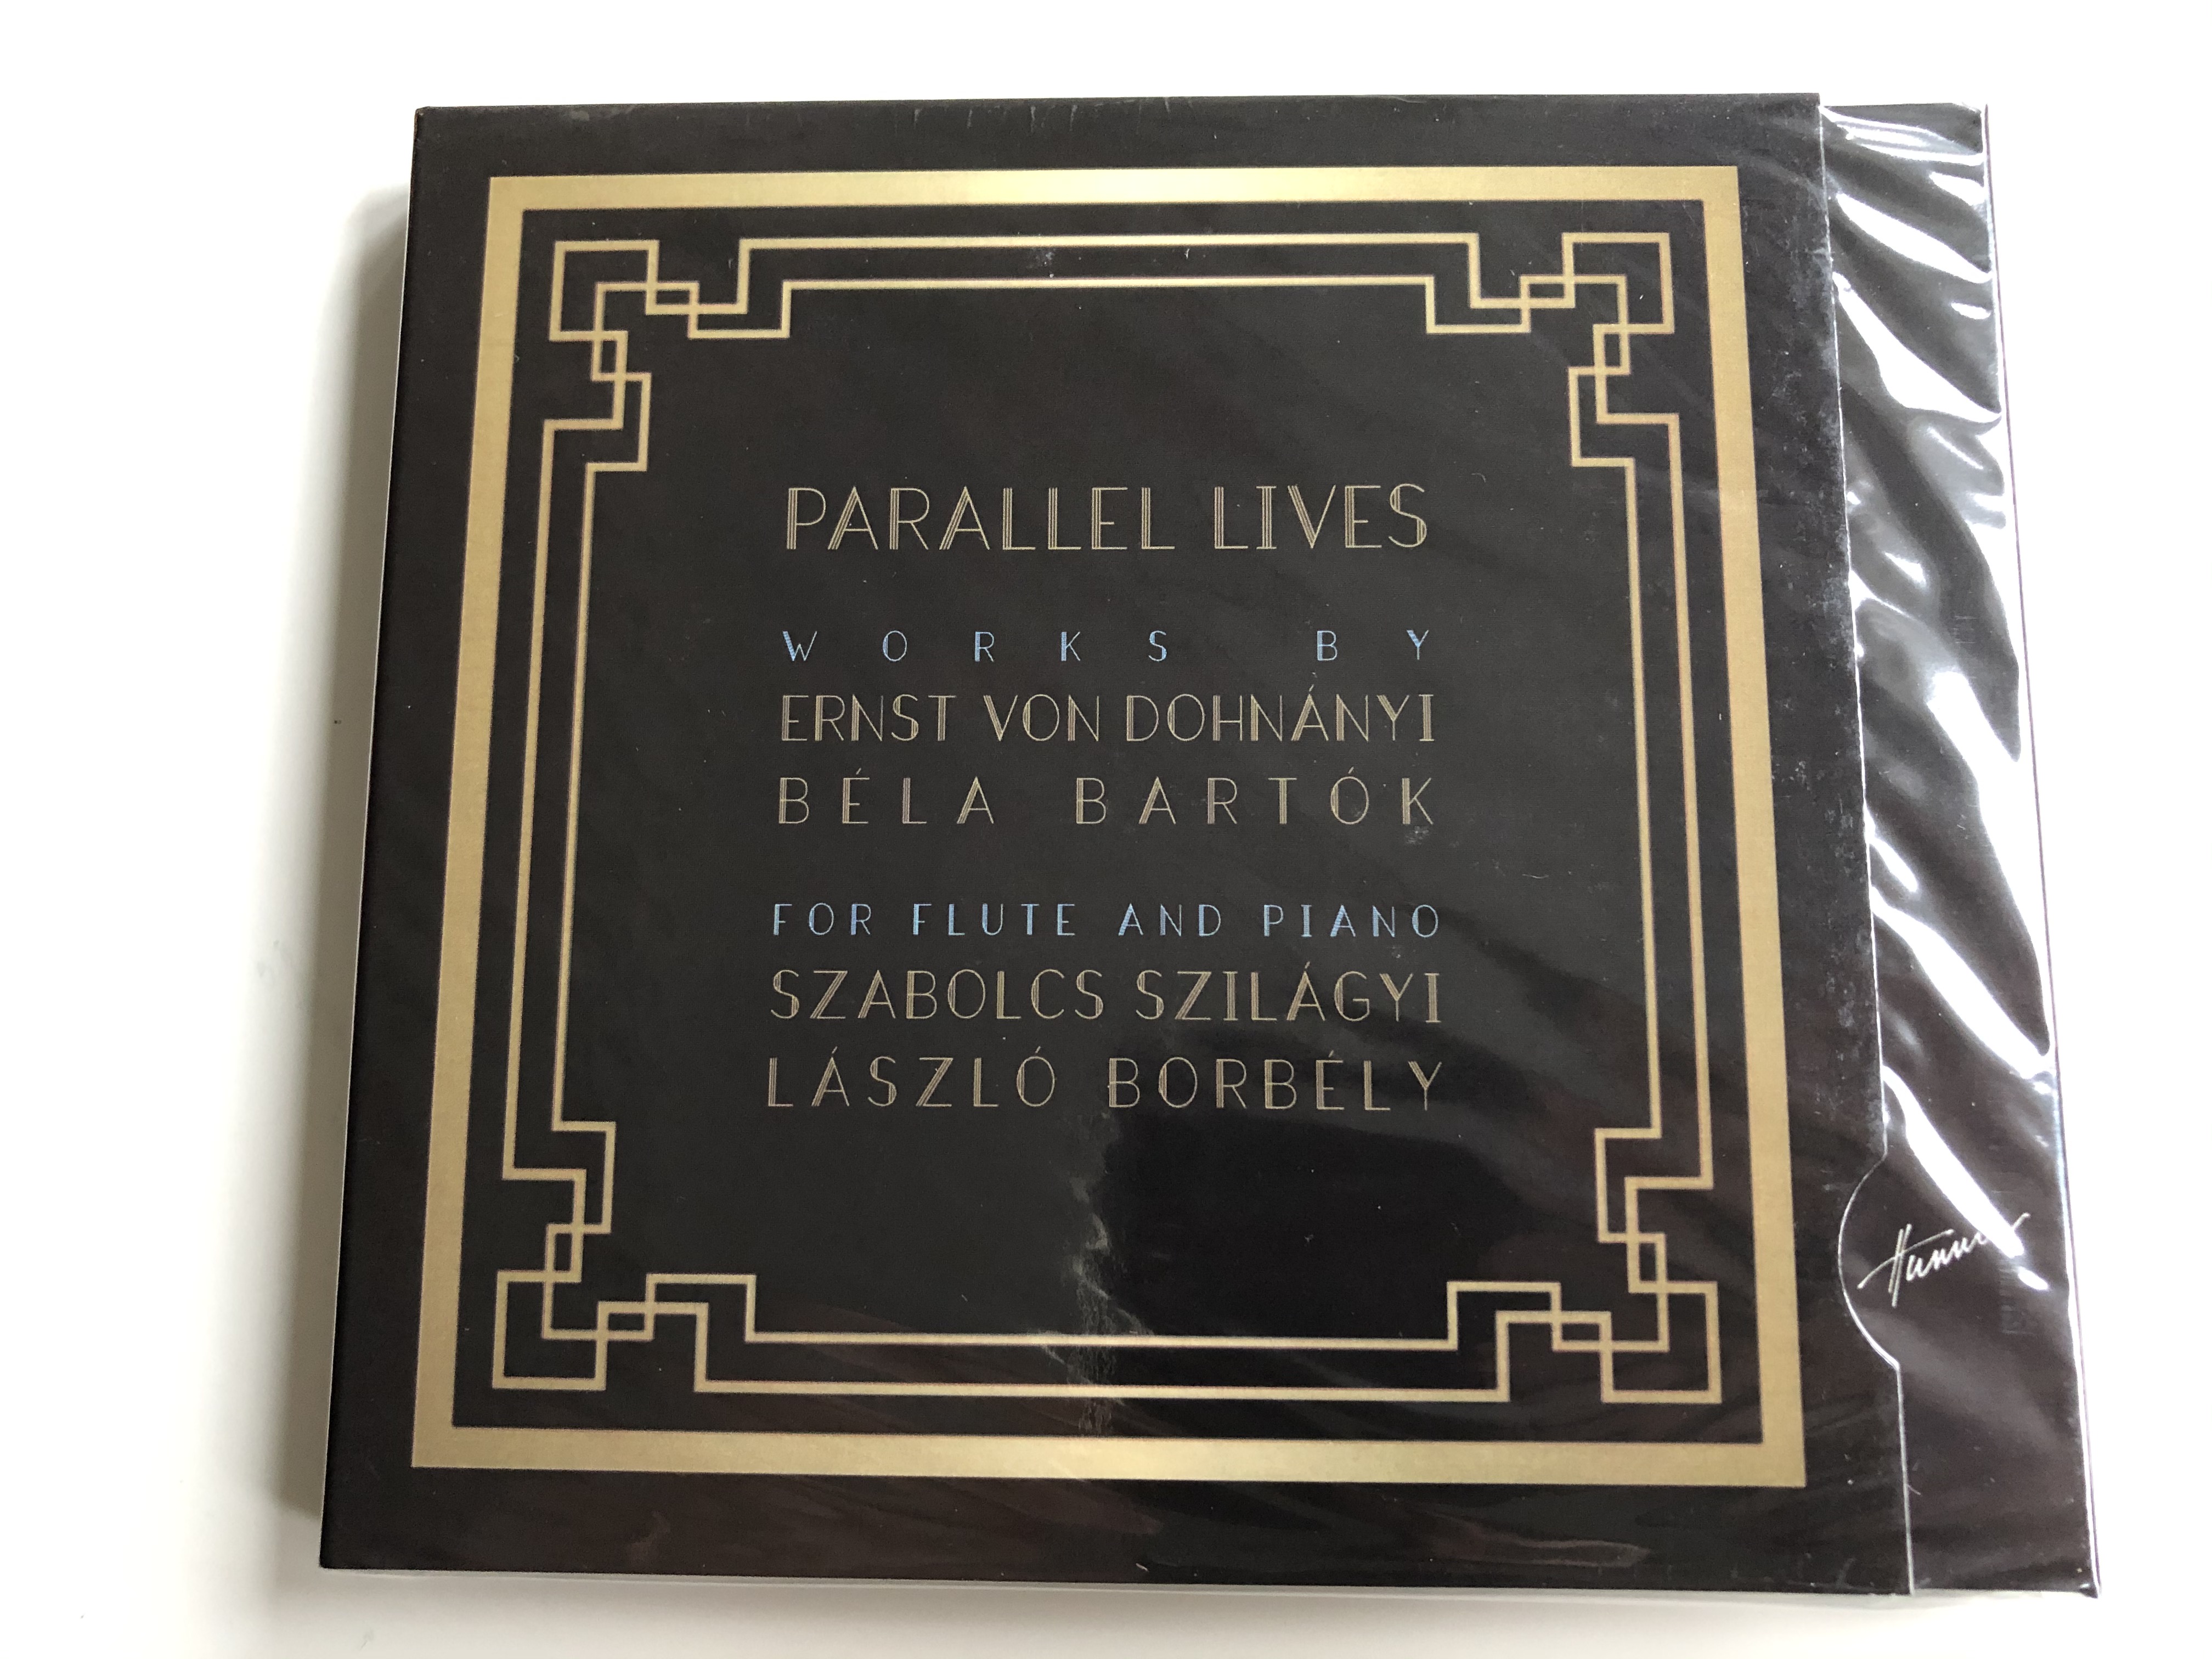 parallel-lives-works-by-ernst-von-dohnanyi-bela-bartok-for-flute-and-piano-szabolcs-szilagyi-laszlo-borbely-hunnia-records-film-production-audio-cd-2019-hrcd1901-1-.jpg